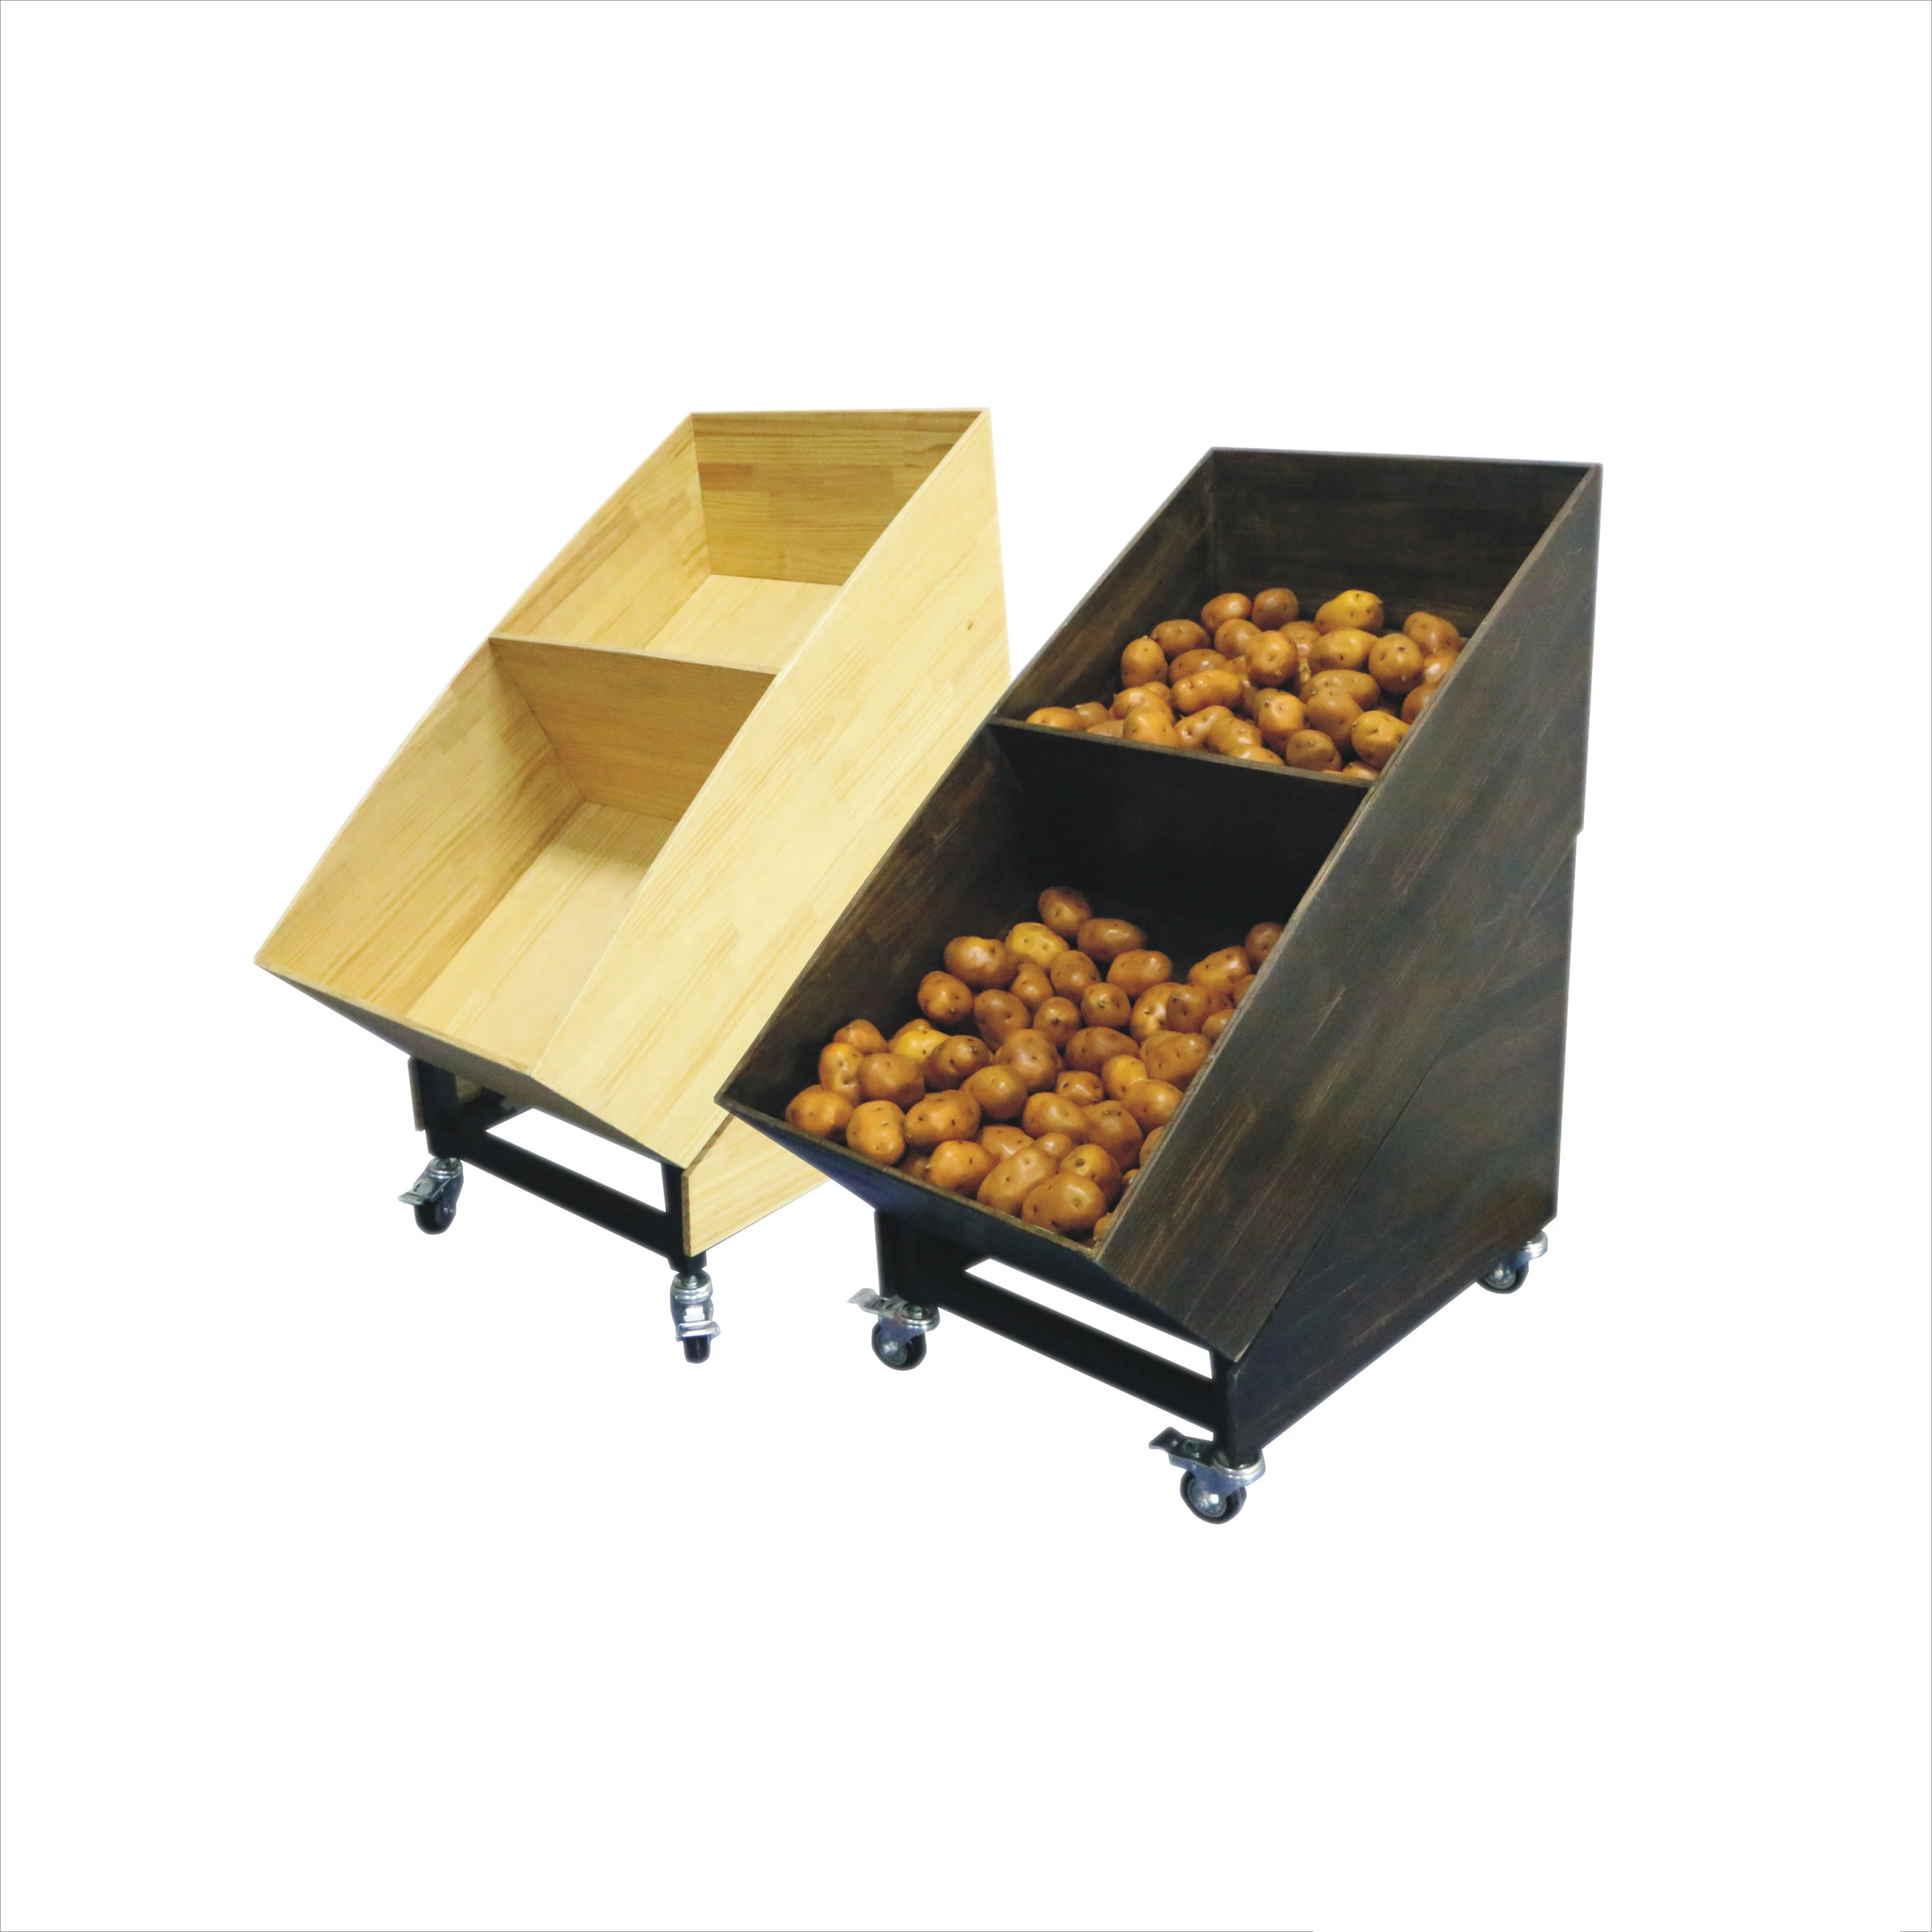 Wooden Fruit and Vegetable Shelf Rack Display Stands with Wheel for Supermarket